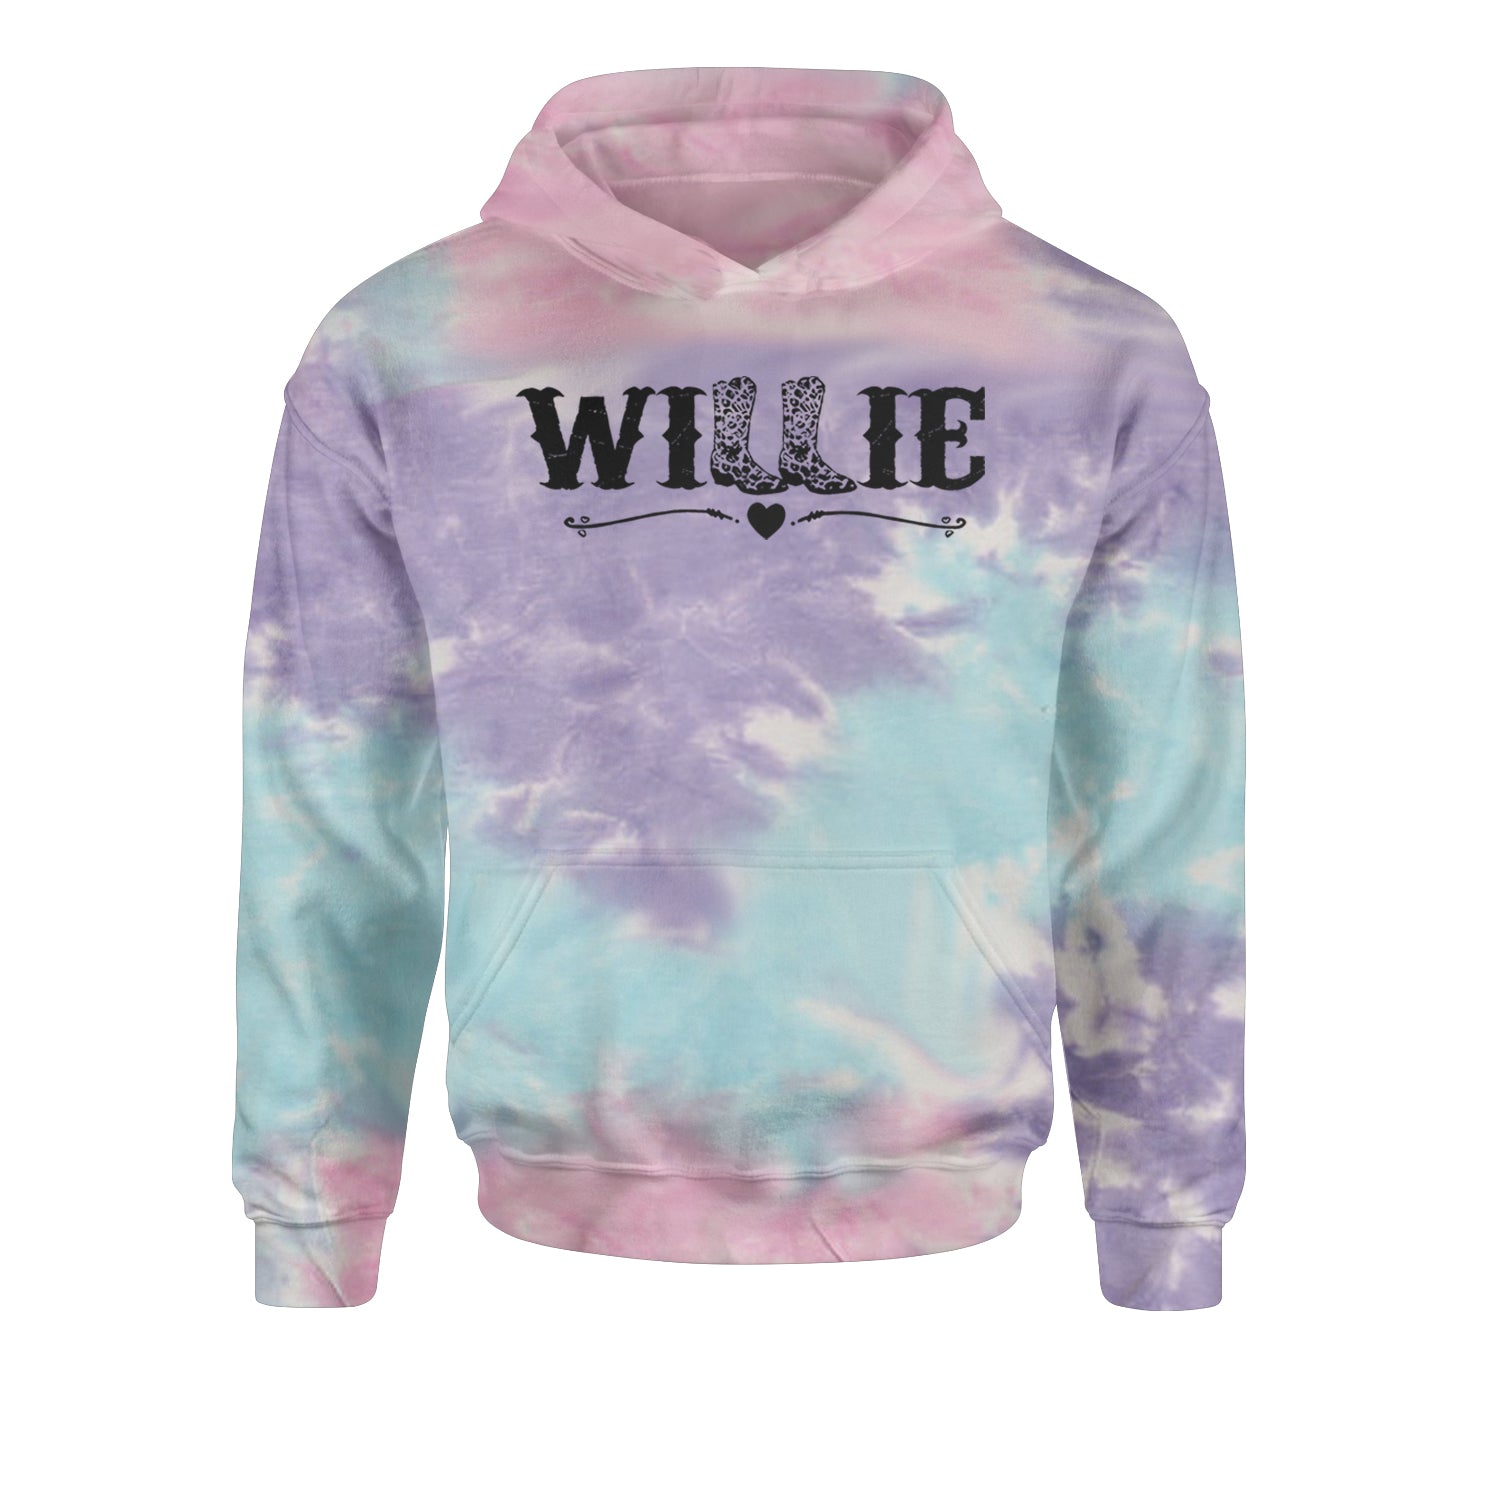 Willie Cowboy Boots Hippy Country Music Youth-Sized Hoodie